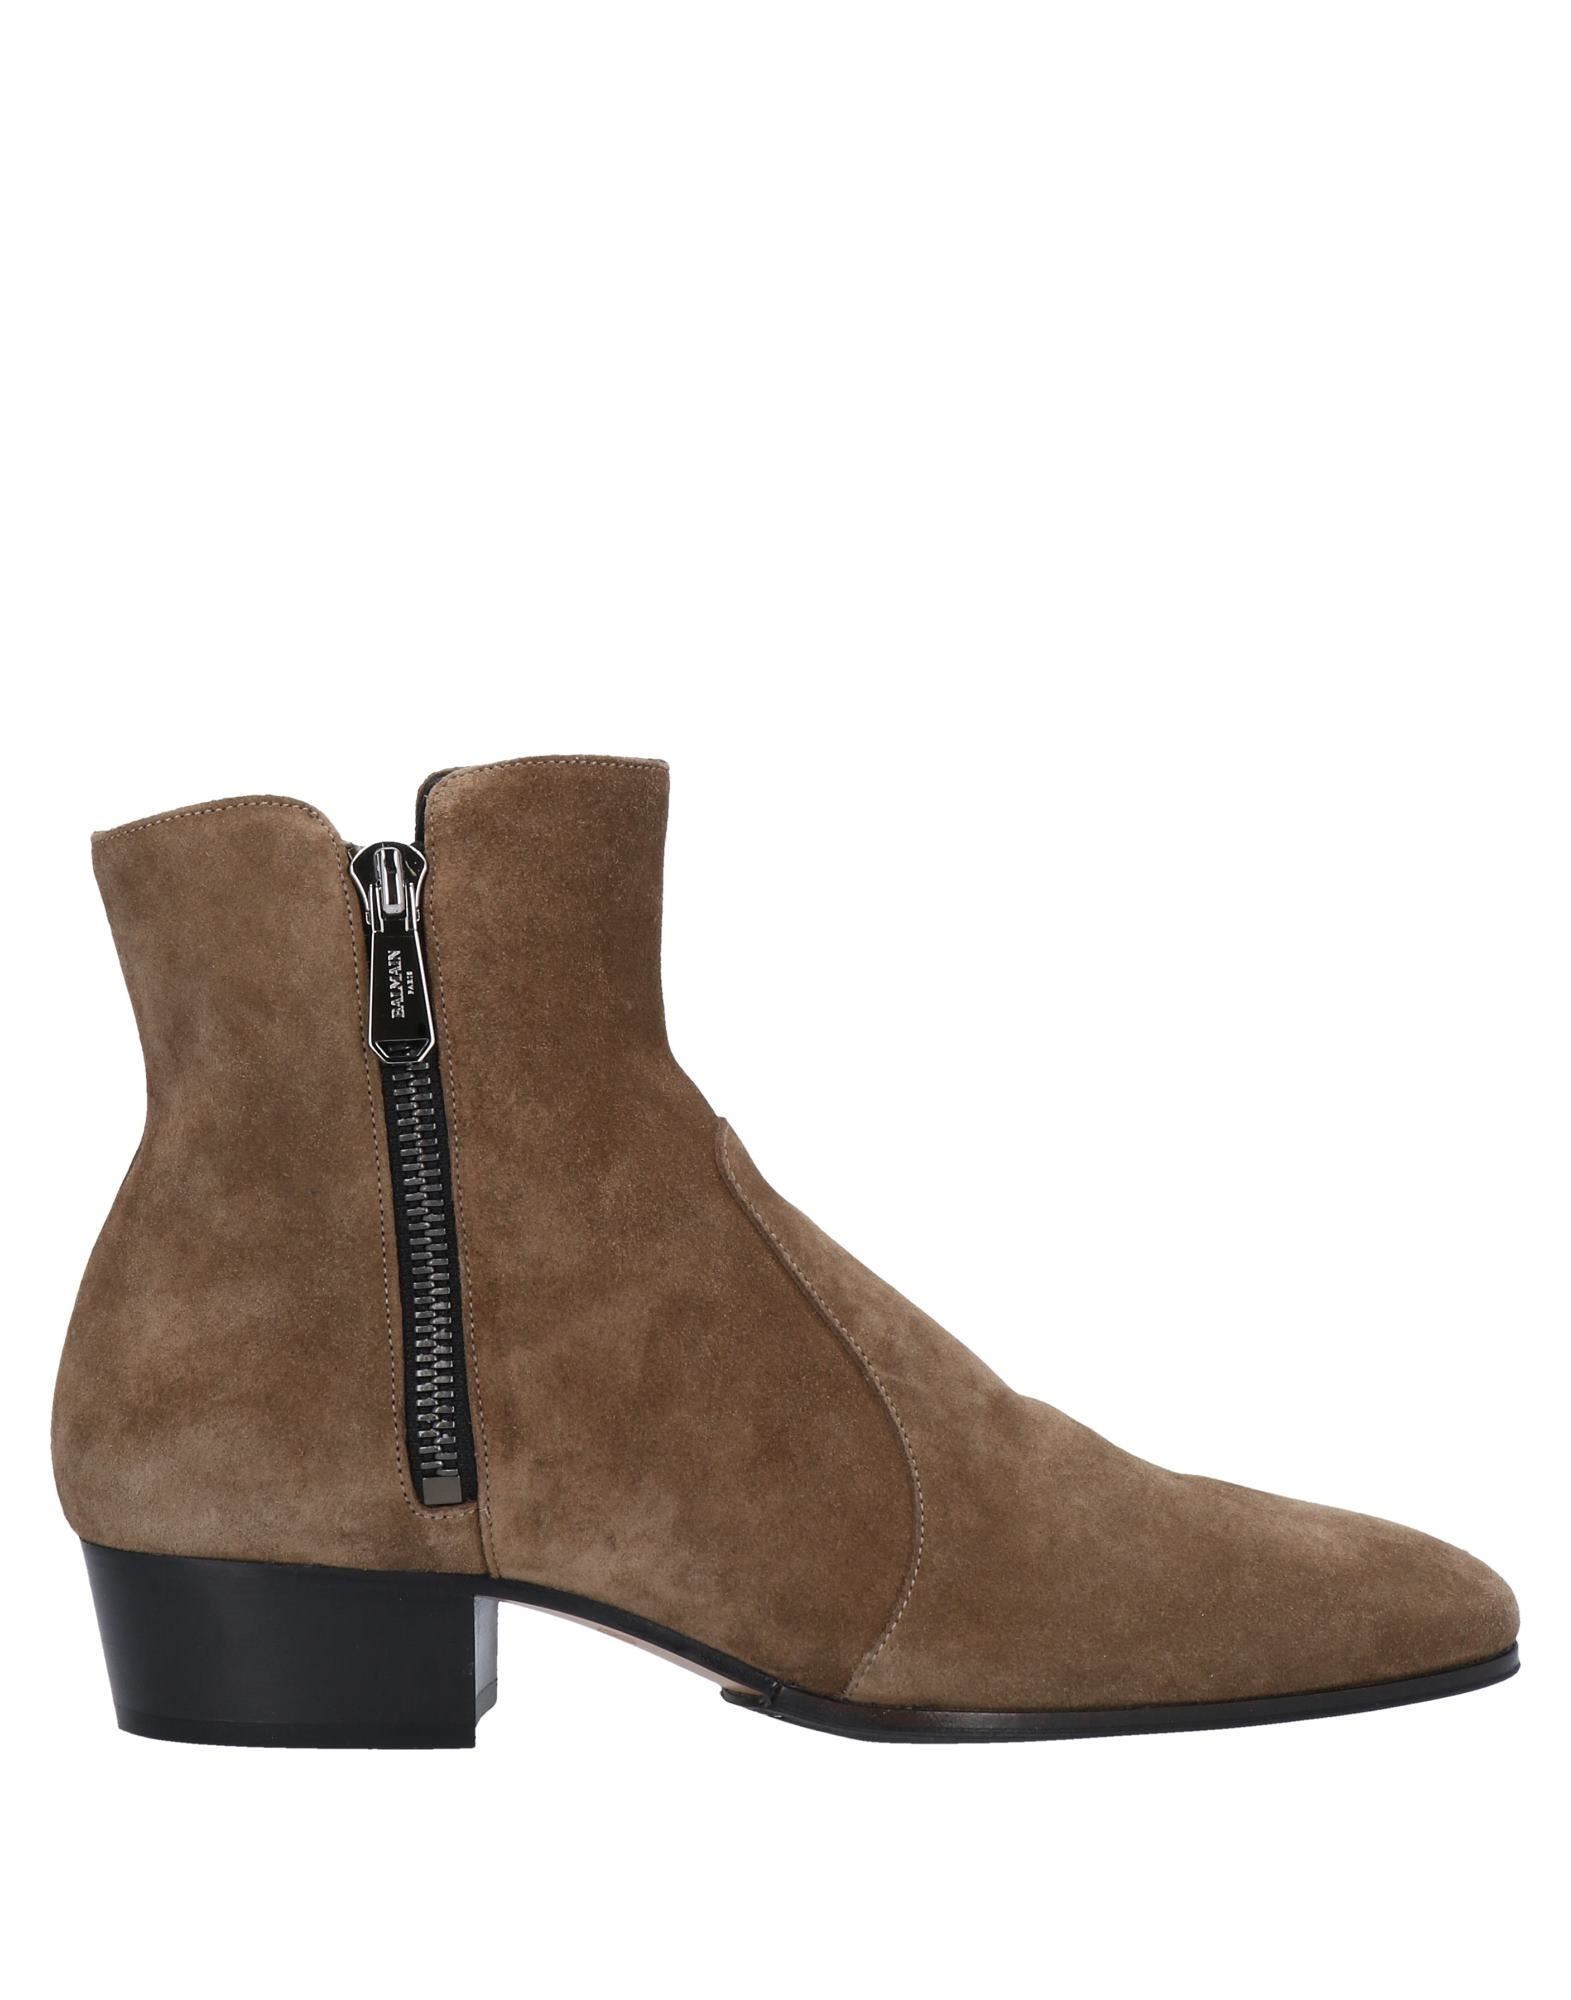 Balmain Ankle Boots In Dove Grey